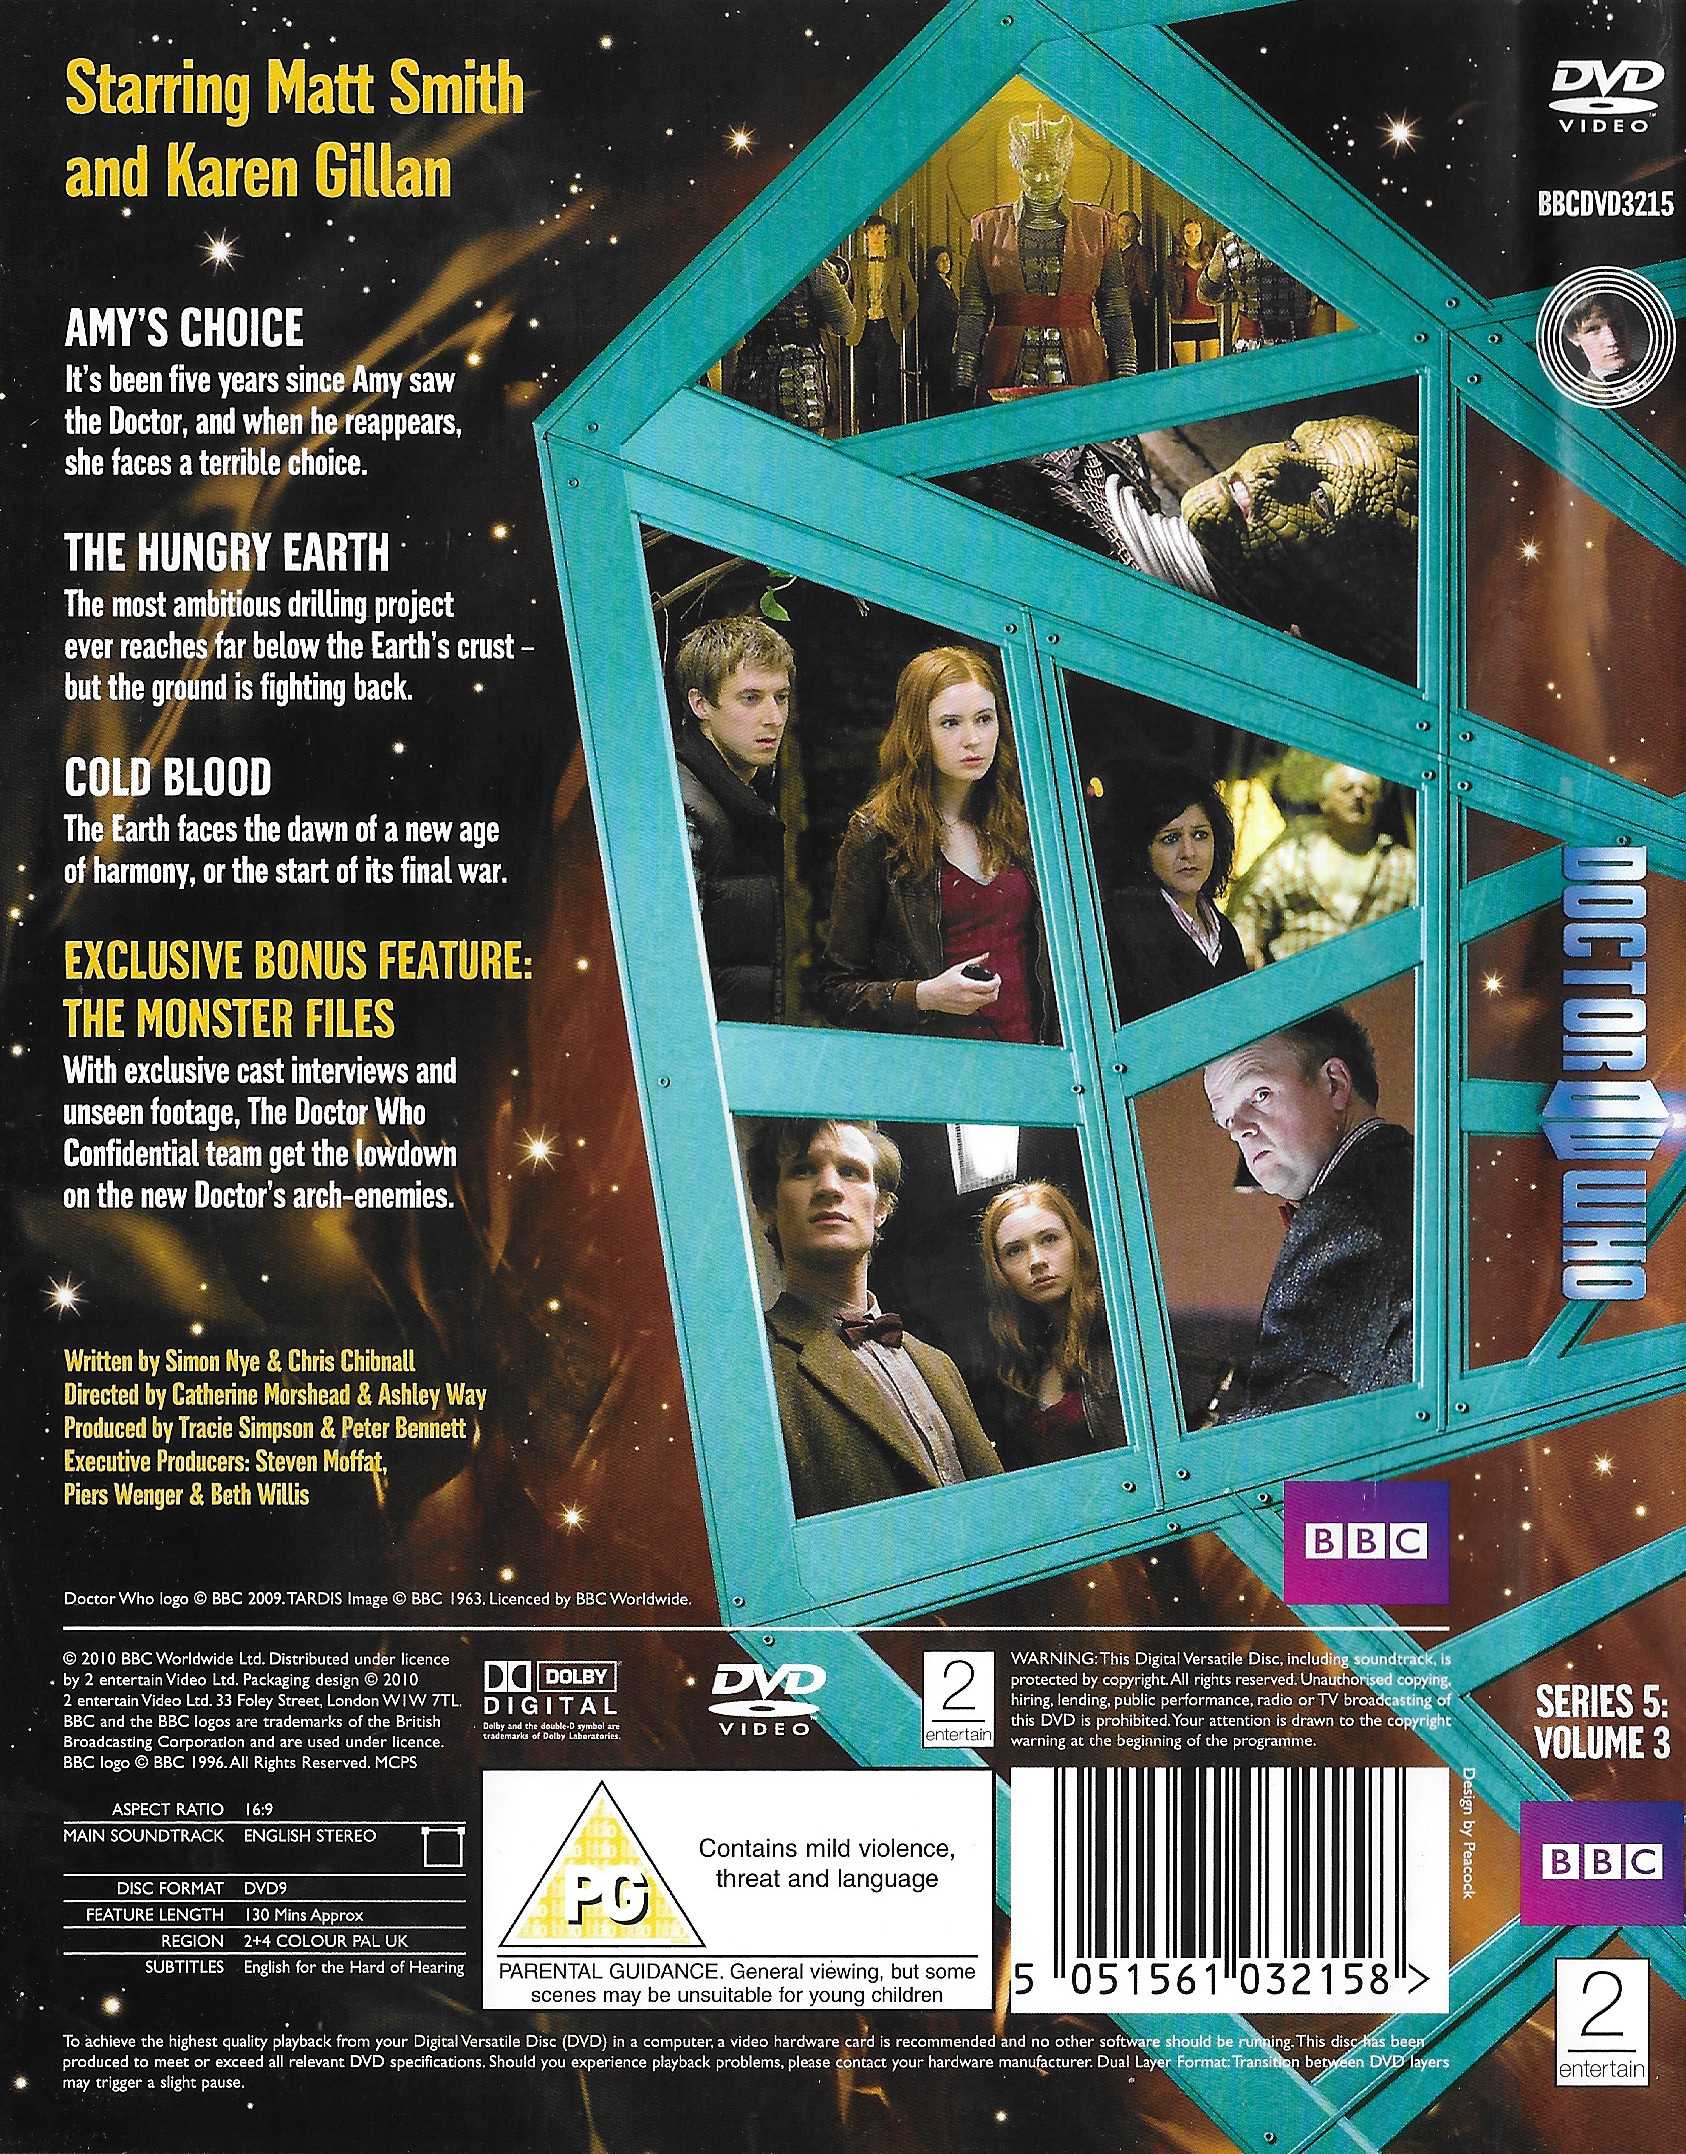 Picture of BBCDVD 3215 Doctor Who - Series 5, volume 3 by artist Simon Nye / Chris Chibnall from the BBC records and Tapes library